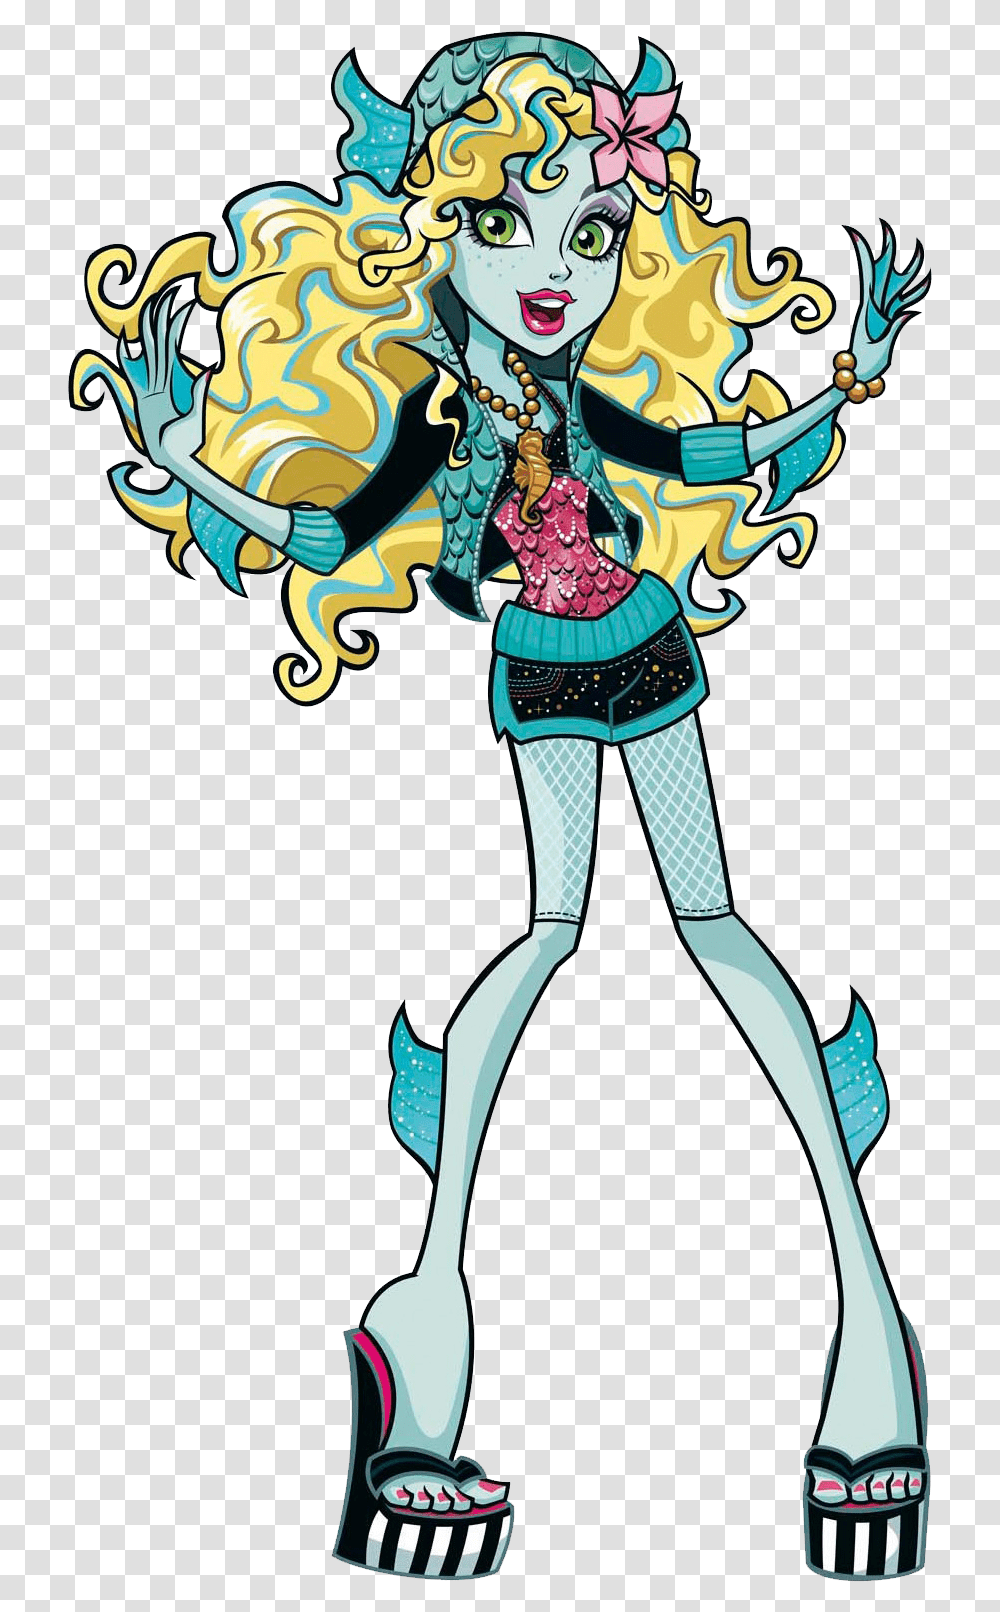 Lagoona Blue Is The Daughter Of A Sea Creature Lagoona Blue Monster High Characters, Book, Comics, Manga Transparent Png